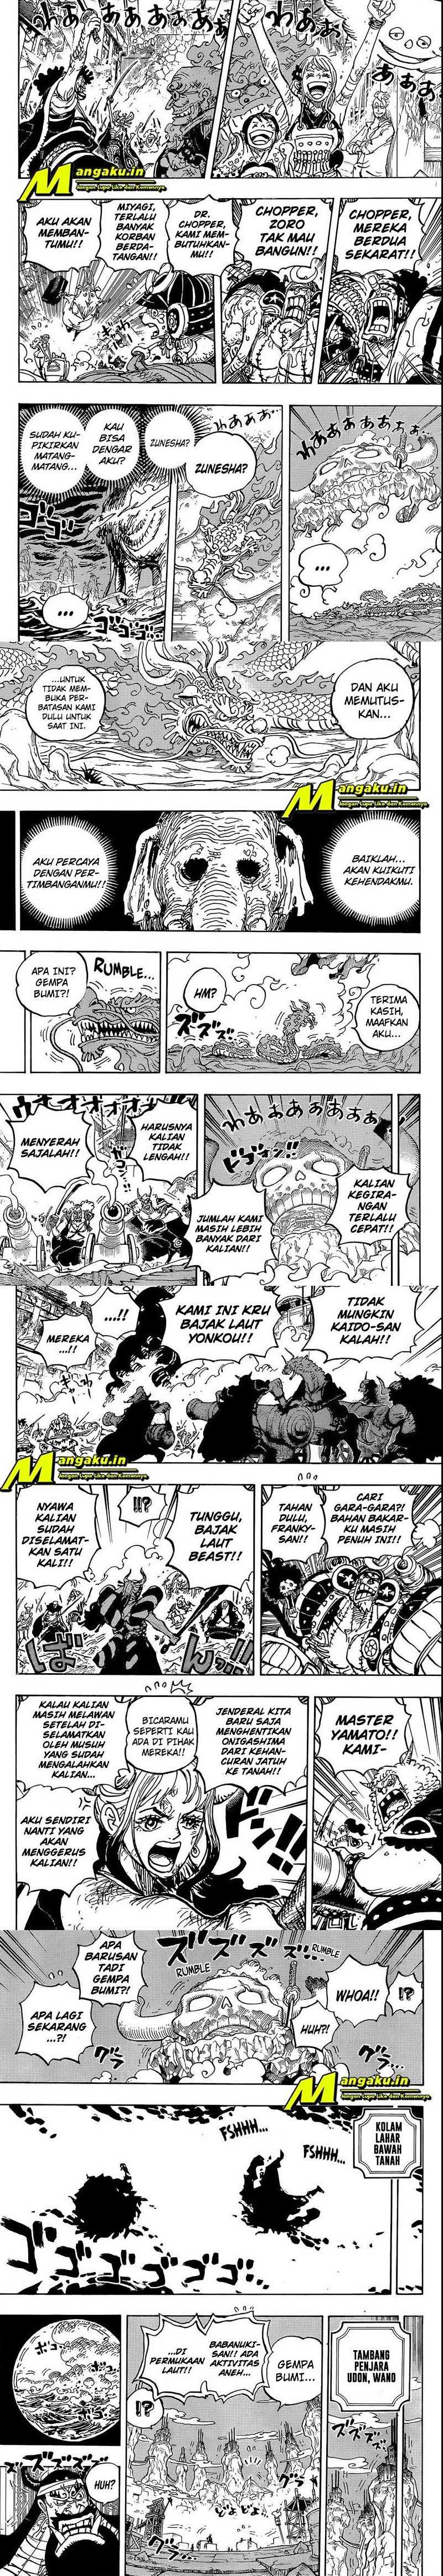 One Piece Chapter 1050 Hq - 35